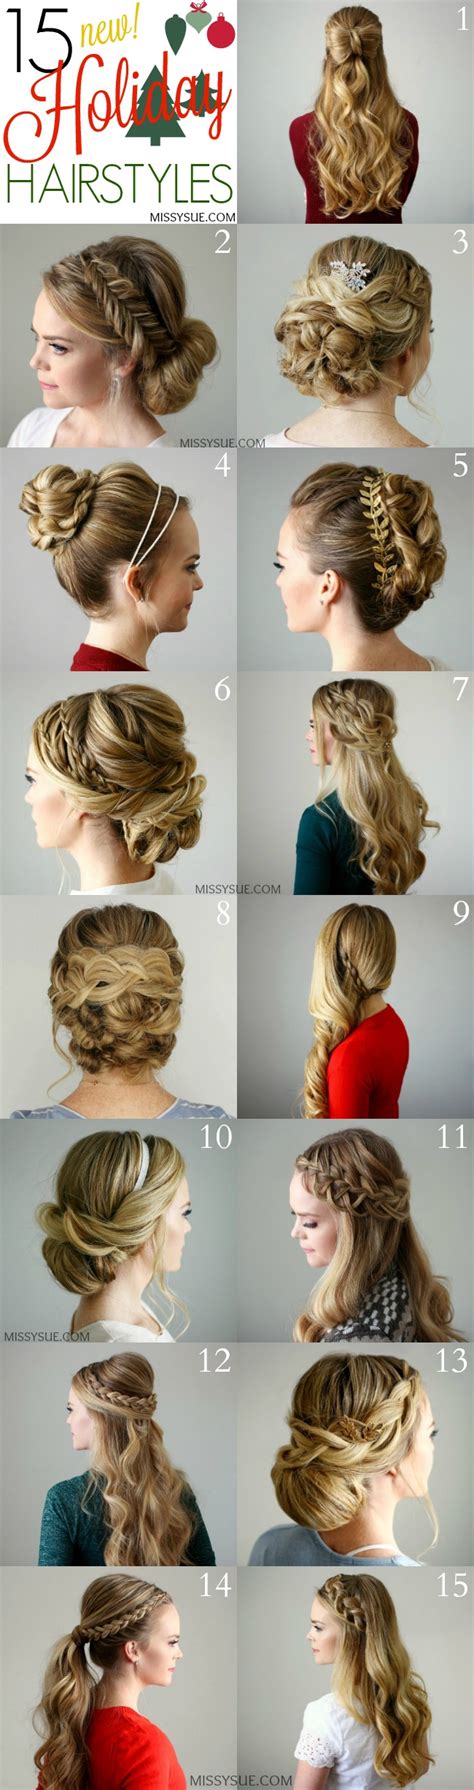 15 Holiday Hairstyles Missy Sue